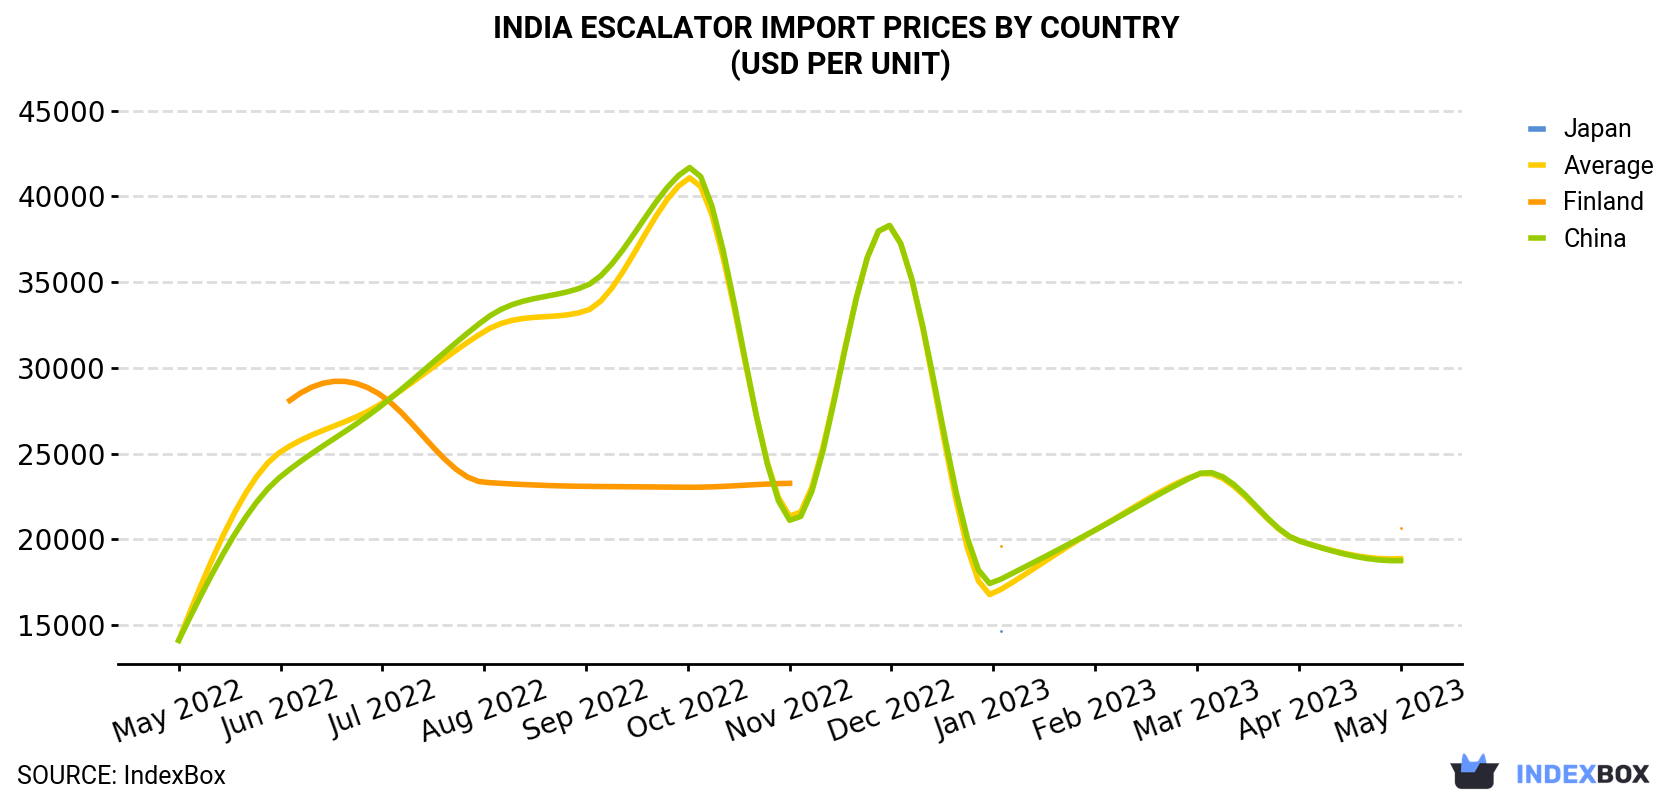 India Escalator Import Prices By Country (USD Per Unit)